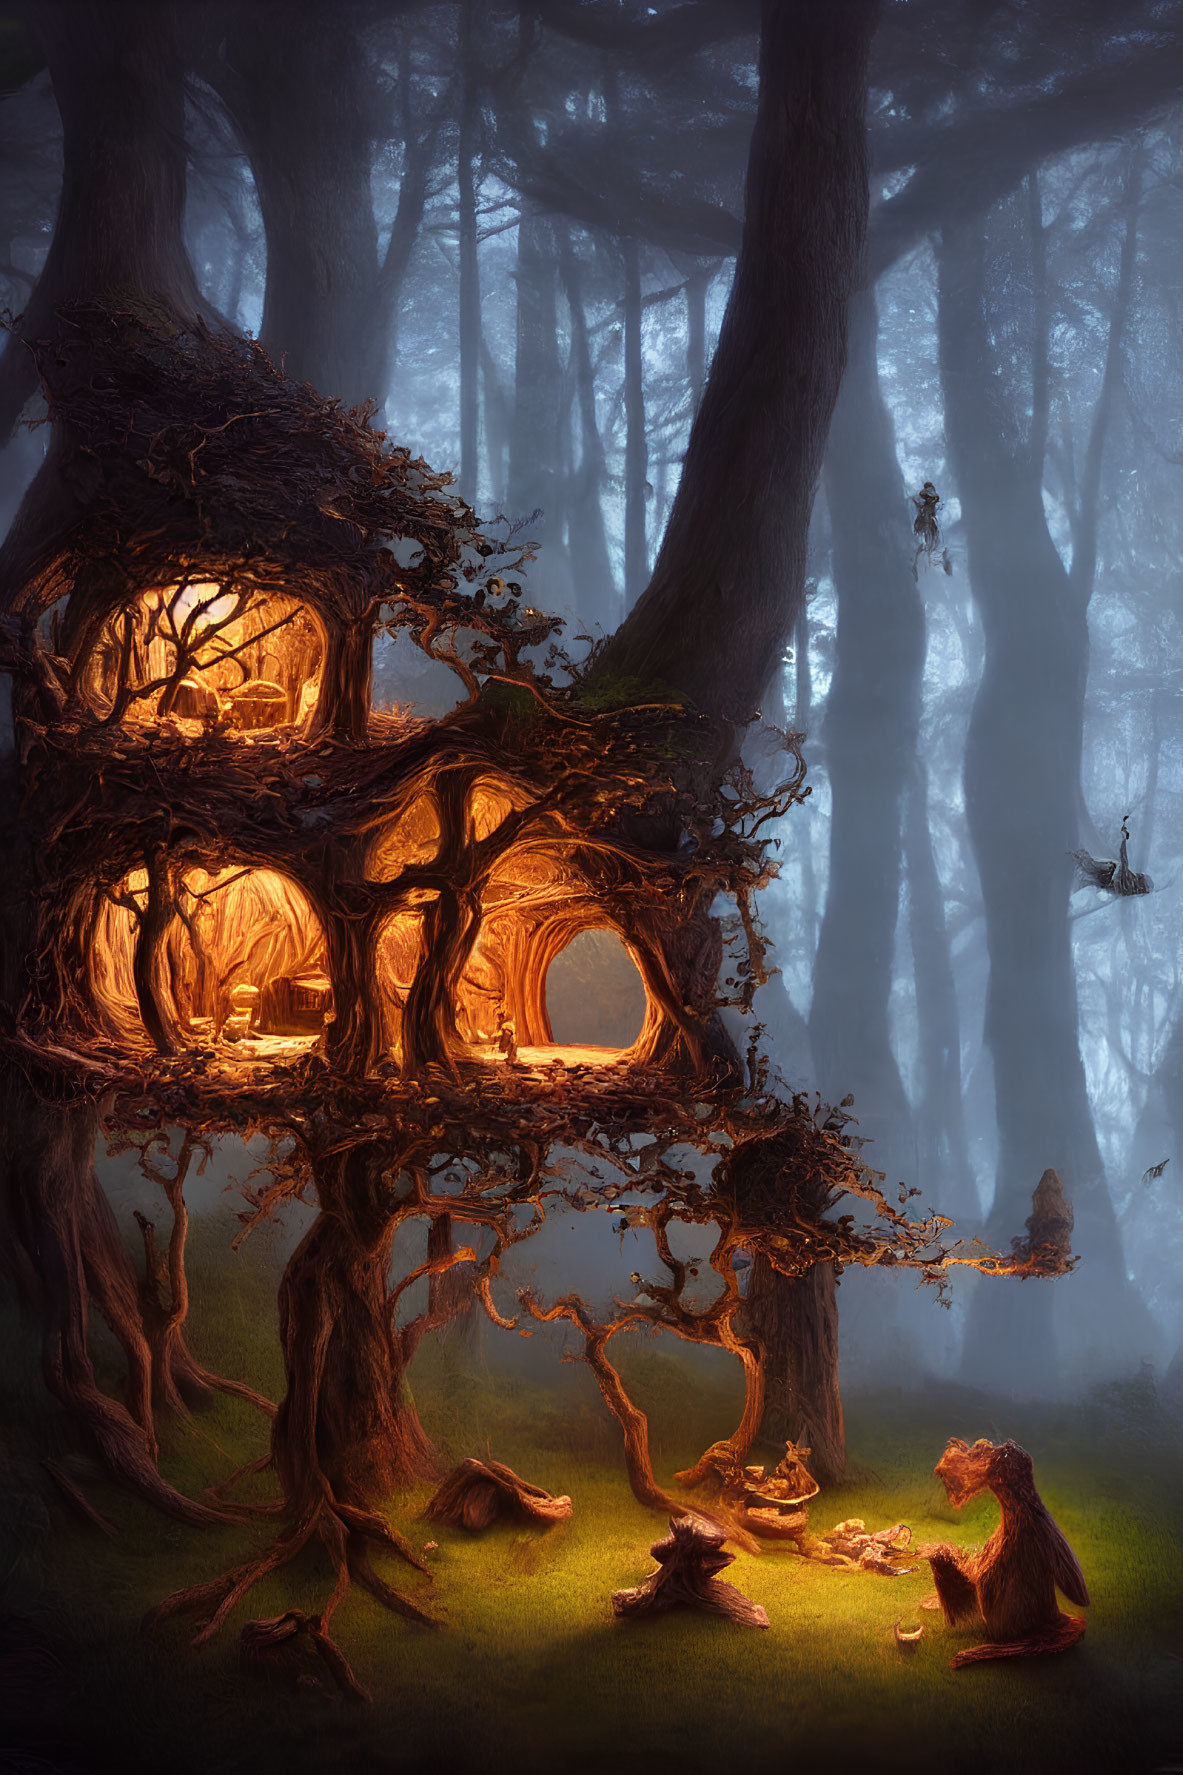 Glowing treehouse in twilight forest with fairy lights and creatures below